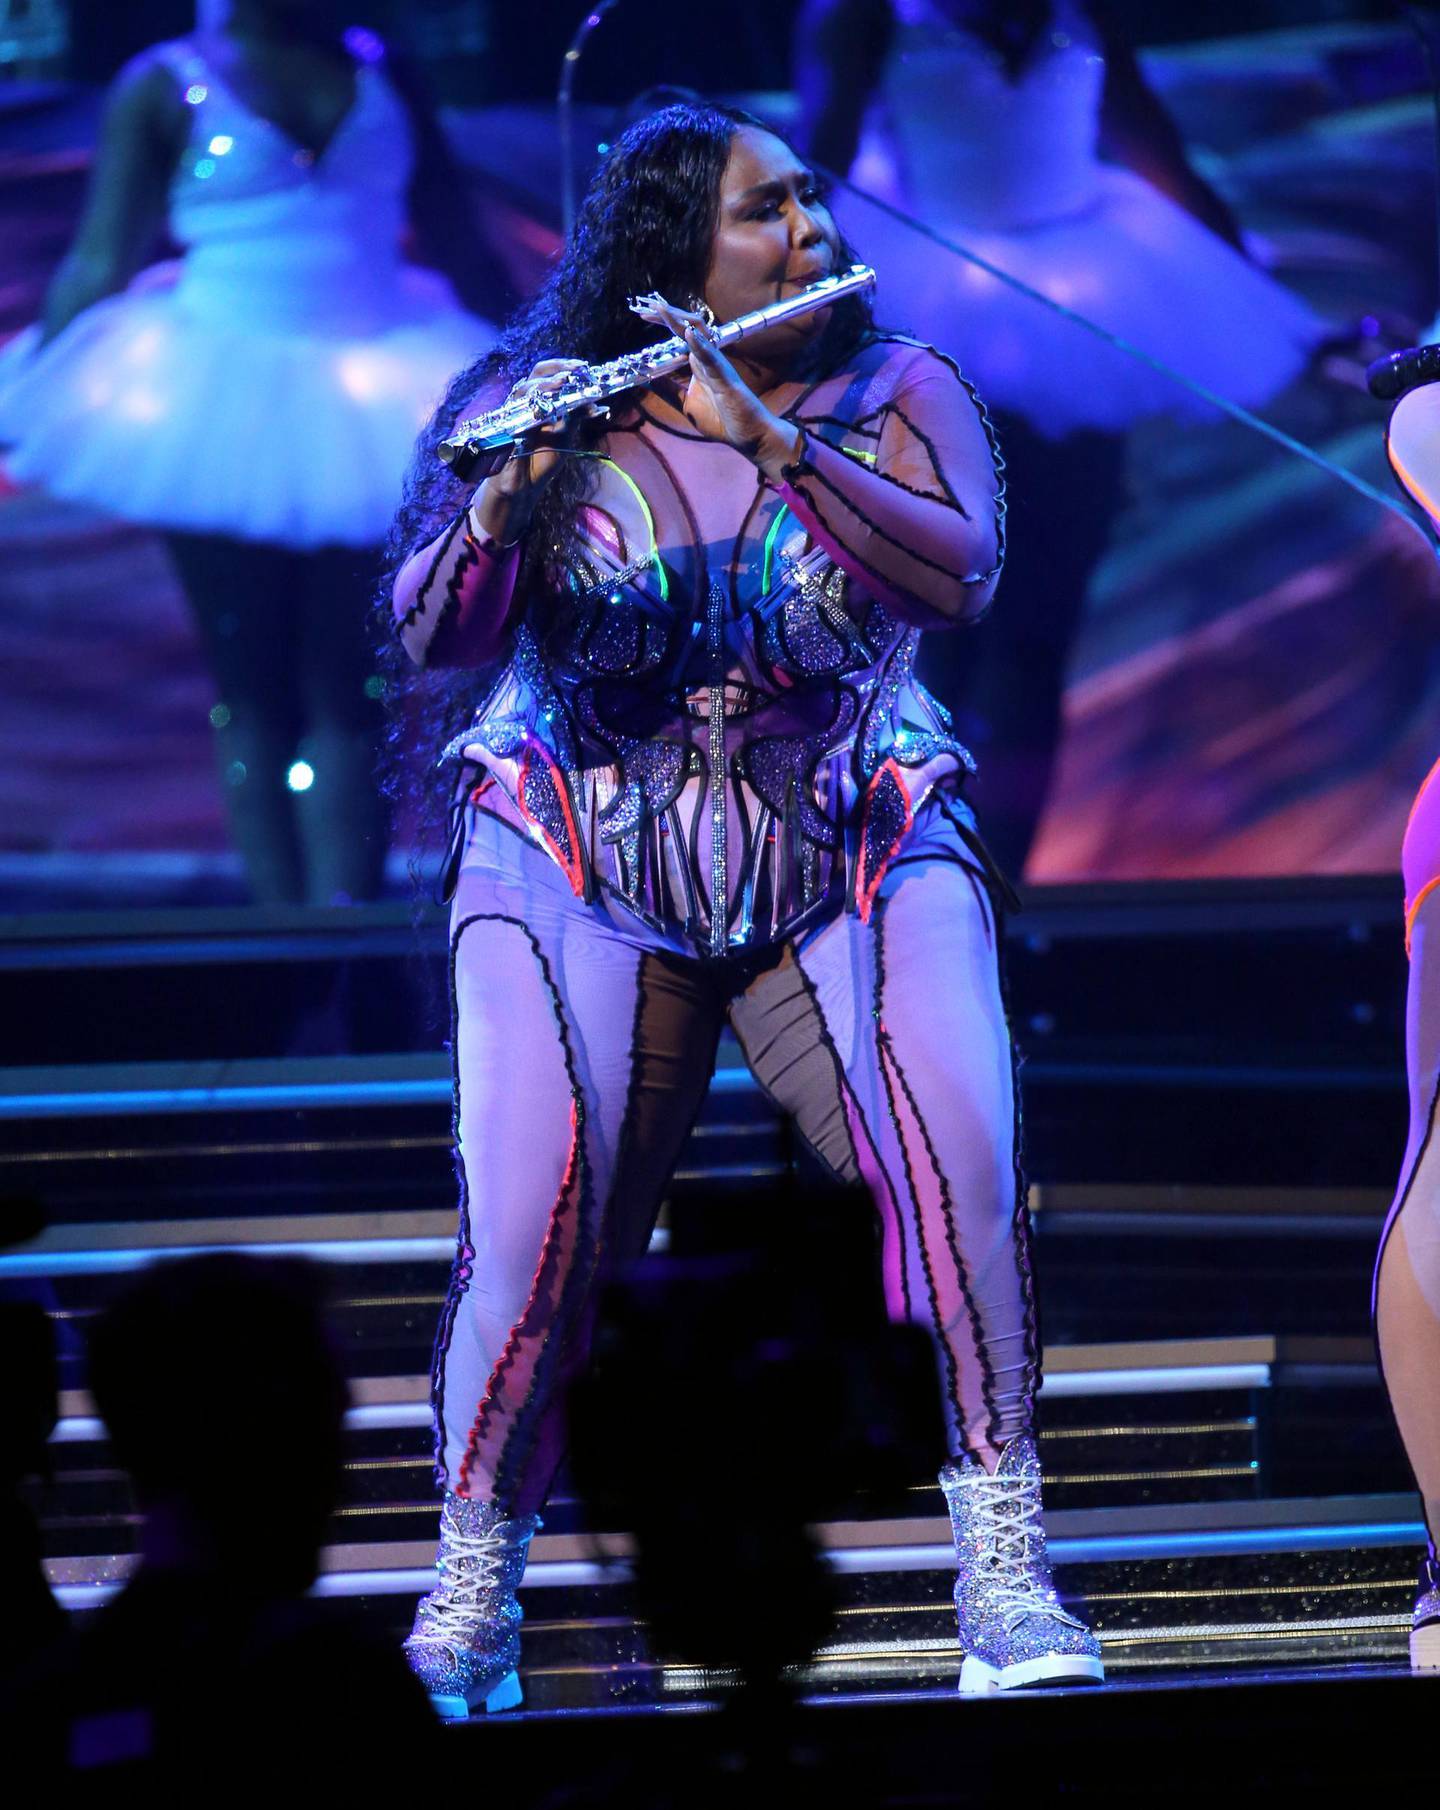 Lizzo plays the flute during her performance at the 62nd annual Grammy Awards on Sunday, Jan. 26, 2020, in Los Angeles. (Photo by Matt Sayles/Invision/AP)